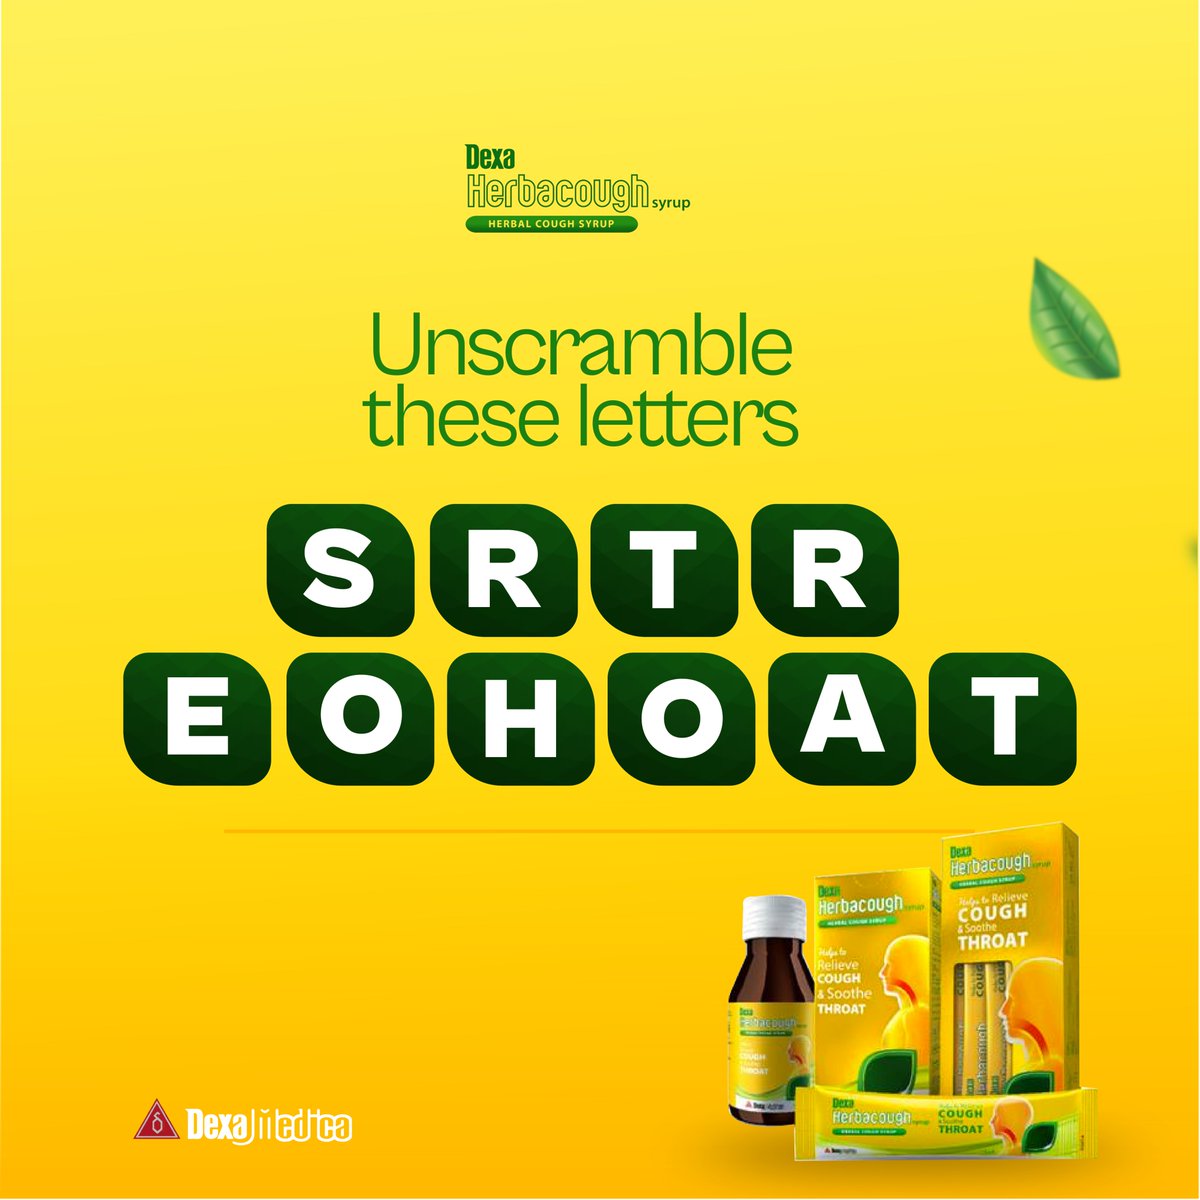 Think you can crack the code? Unscramble the word related to Herbacough and stand a chance to win a recharge card! #Herbacough #coughrelief #sorethroat #coughremedy #trivia